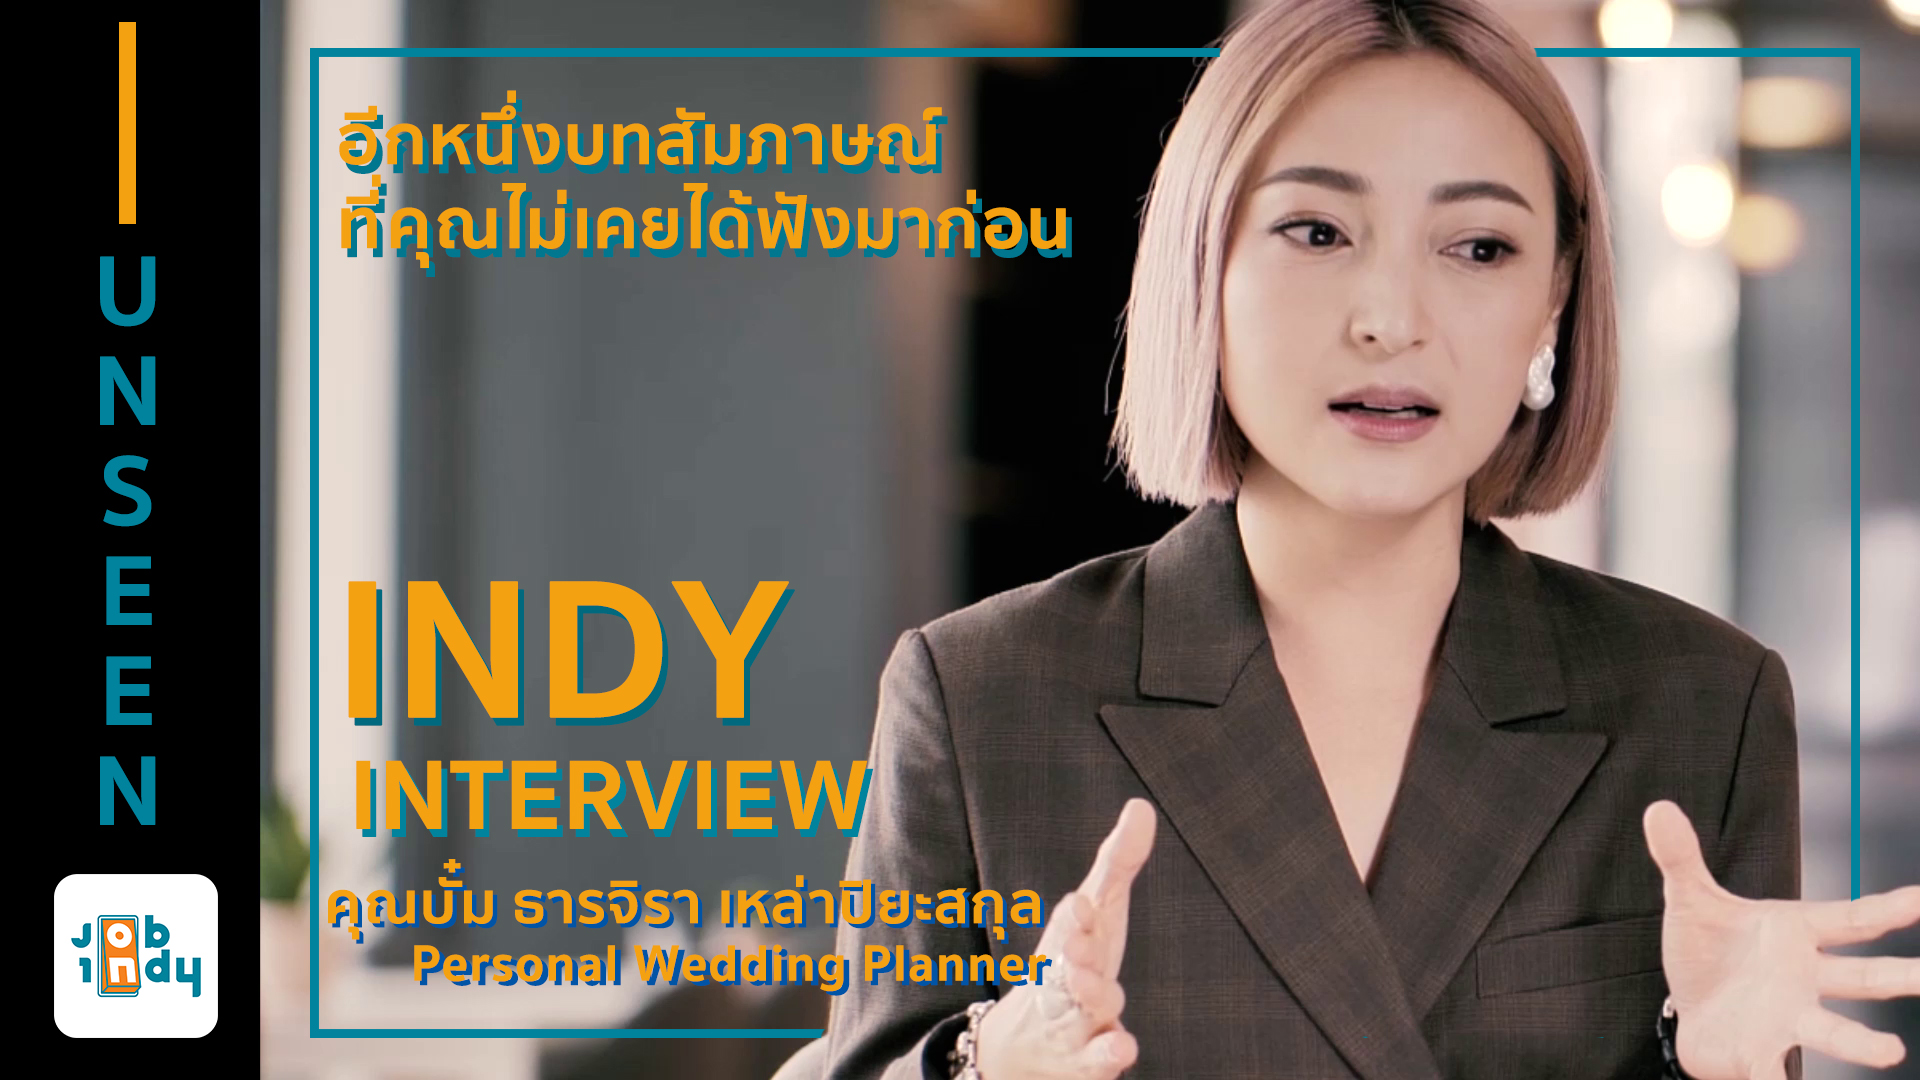 INDY INTERVIEW [Unseen Special] Personal Wedding Planner คุณบั๋ม ธารจิรา